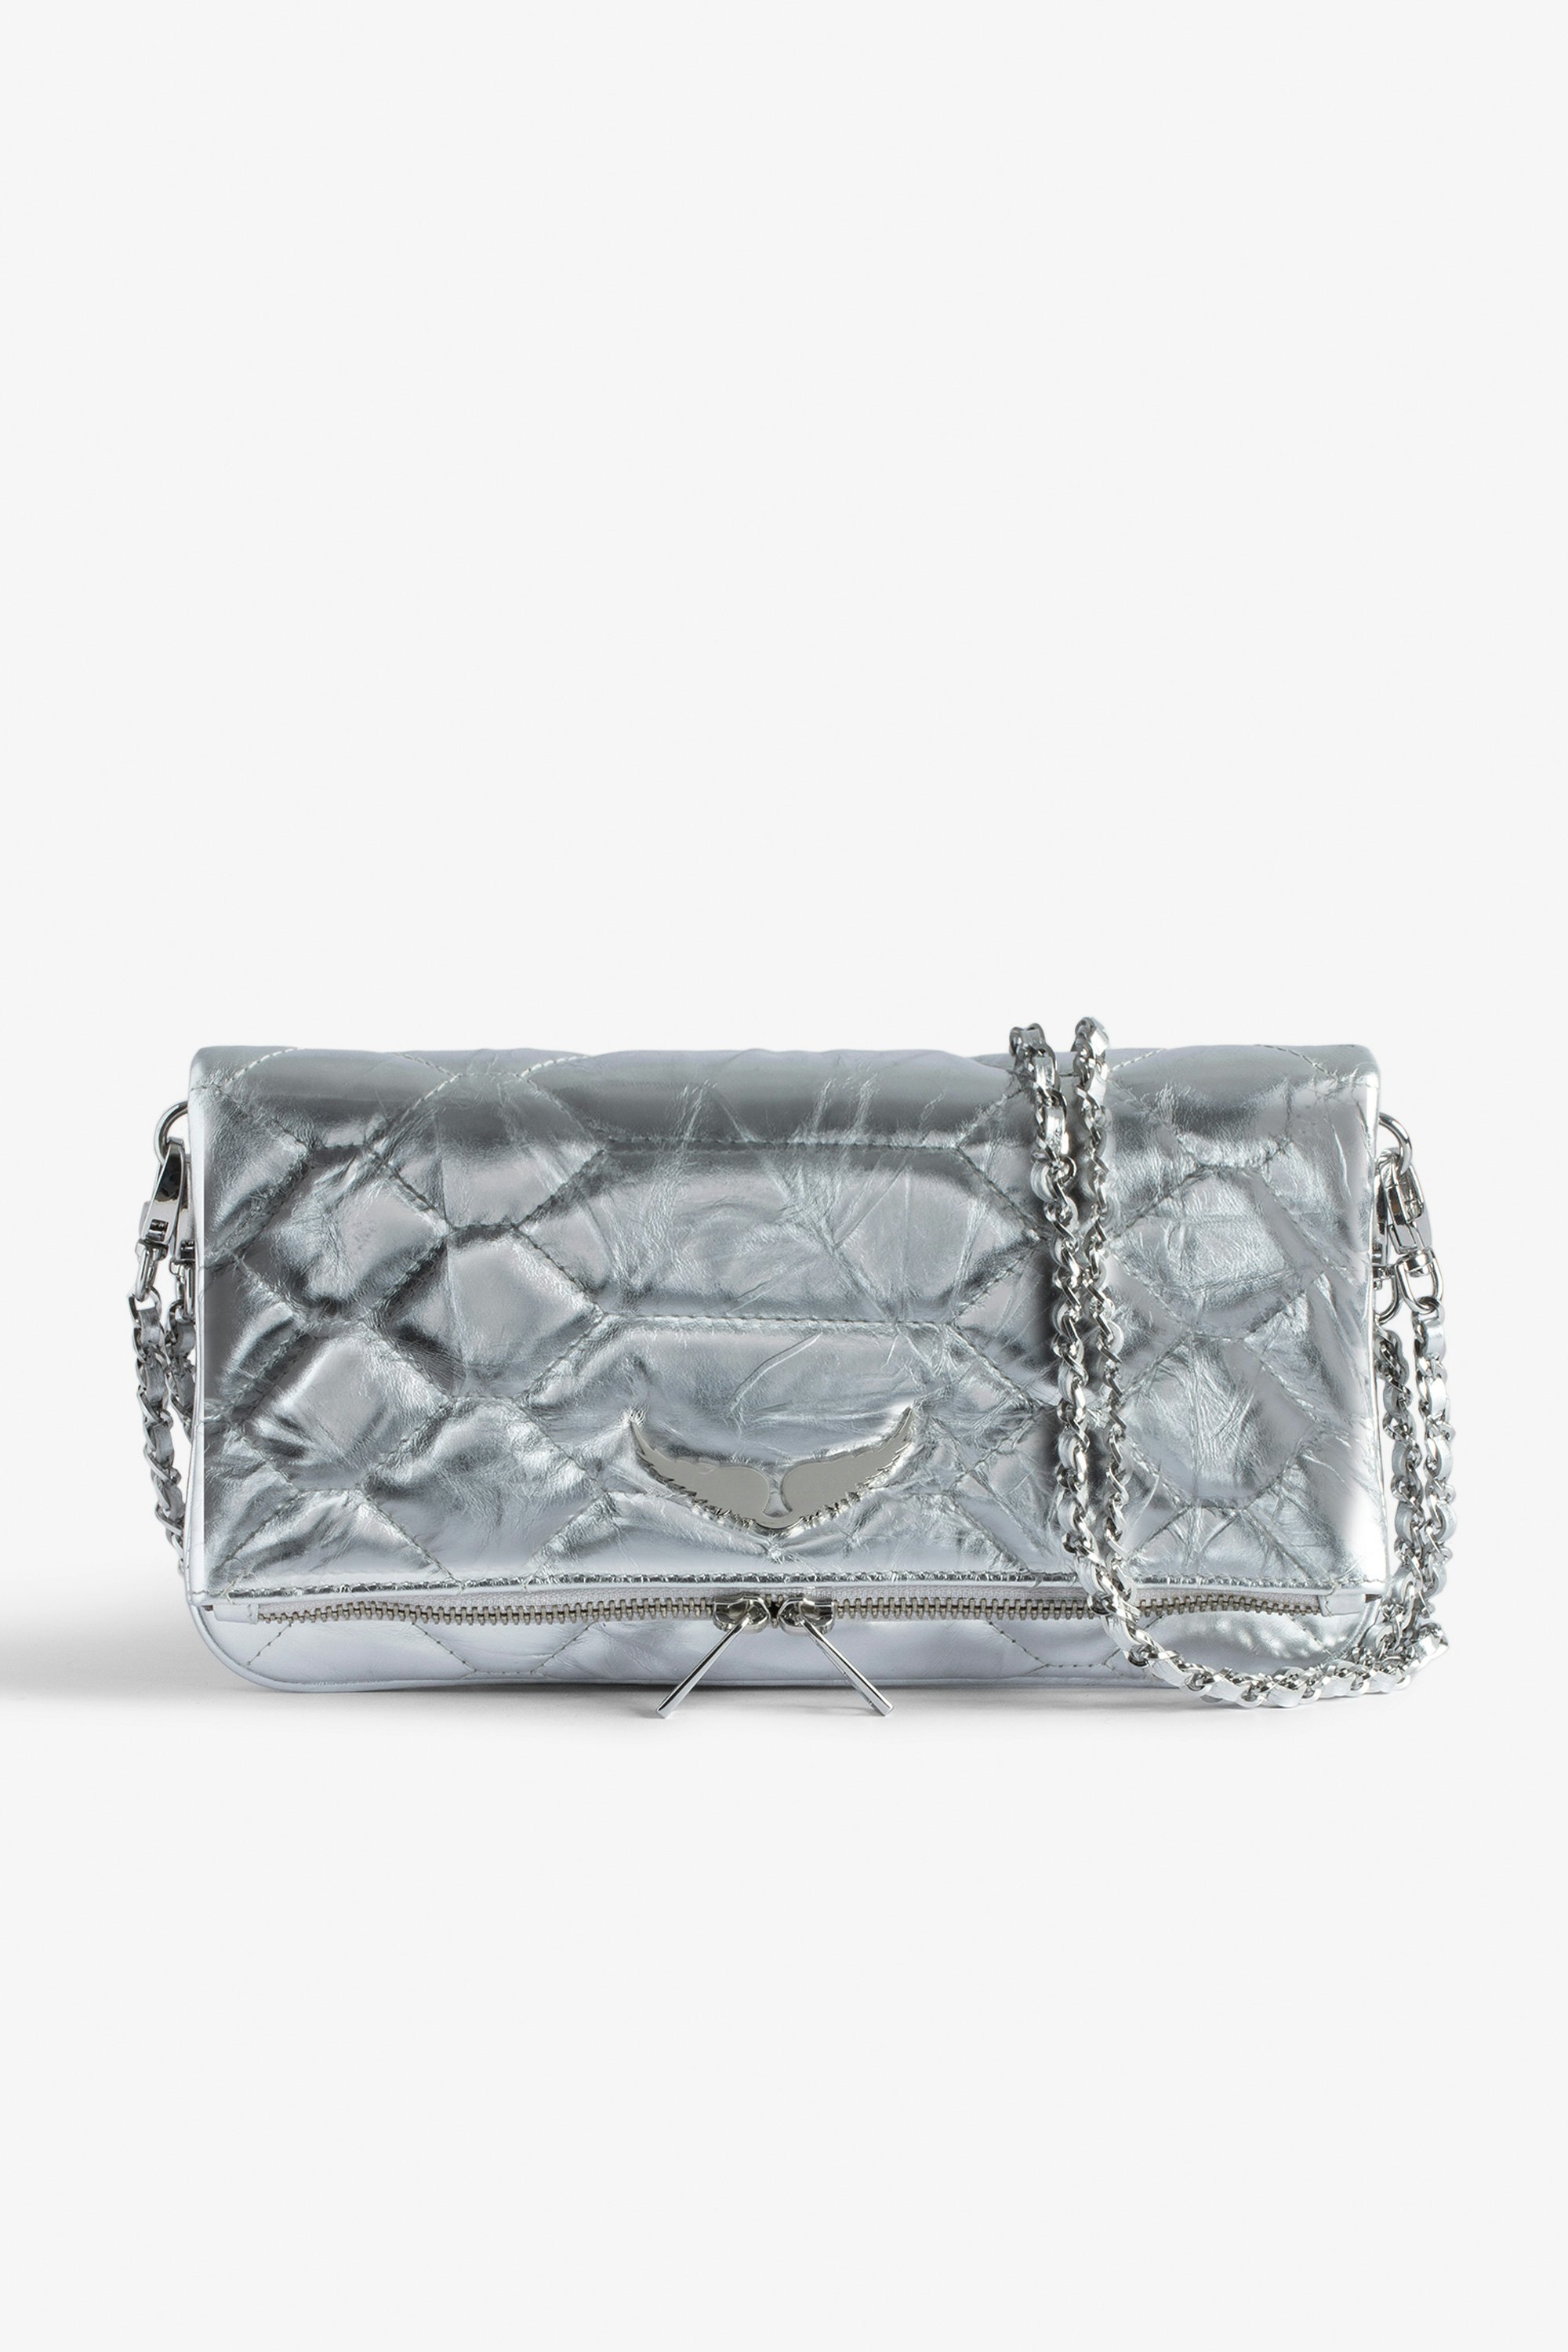 Rock Quilted Metallic Clutch - Rock silver crinkled quilted leather clutch with double leather and metal chain.